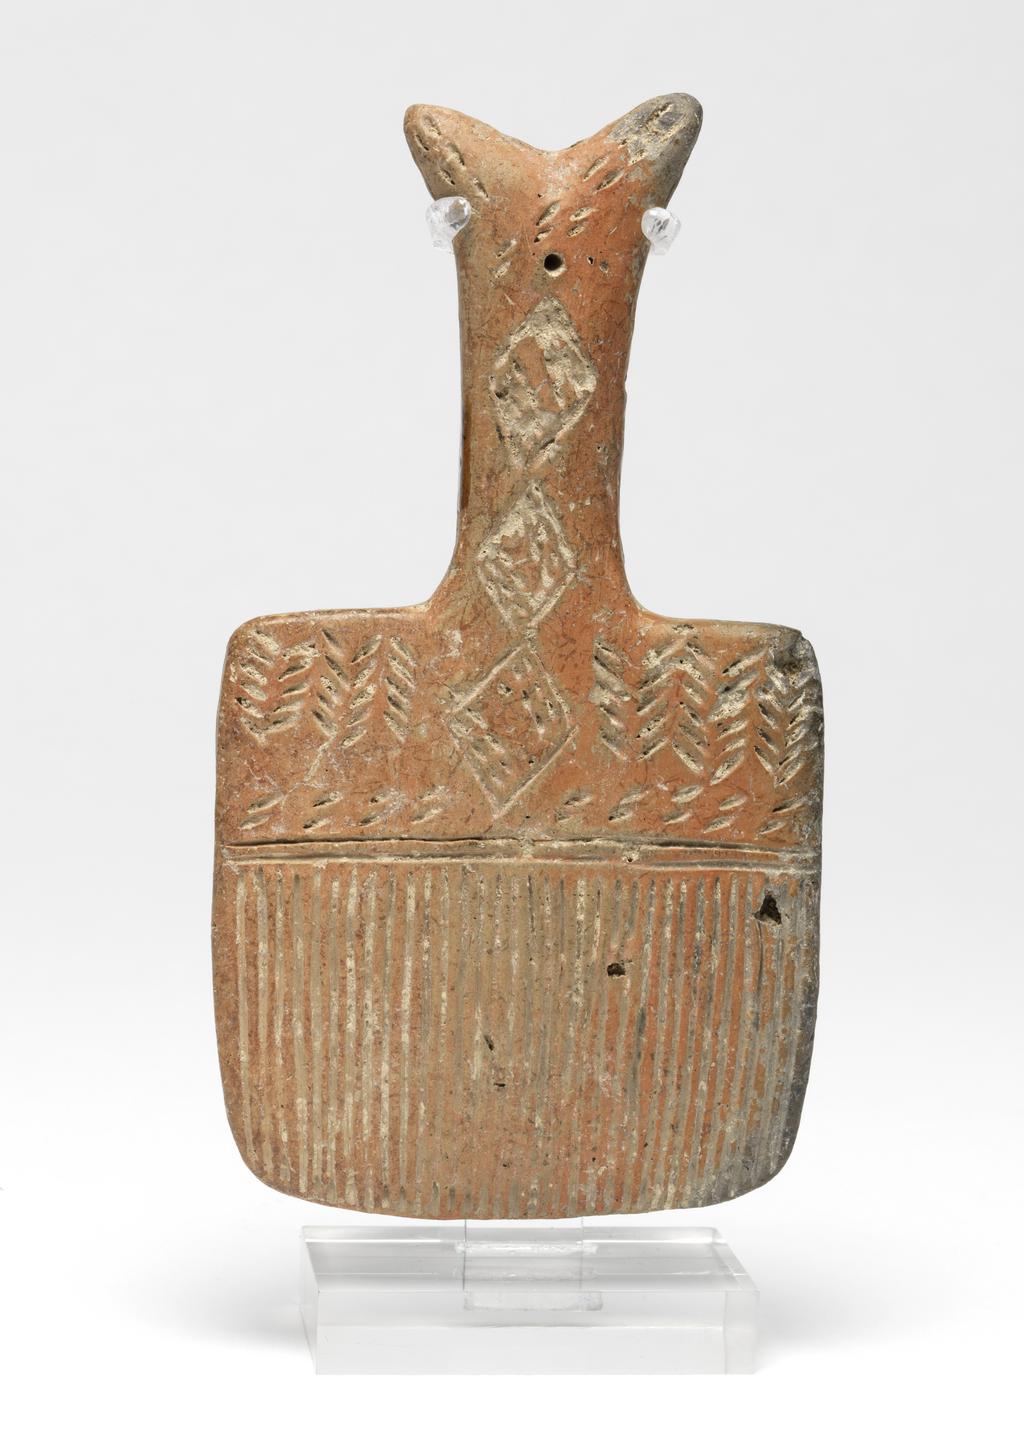 An image of Model of brush. Production Place: Cyprus. Find Spot: Vounous Cyprus; Tomb 121. Clay, red-polished ware, depth, 0.014 m, height 0.134 mwidth 0.073 m, 2200 to 2101 B.C. Early Cypriot II. Bronze Age.